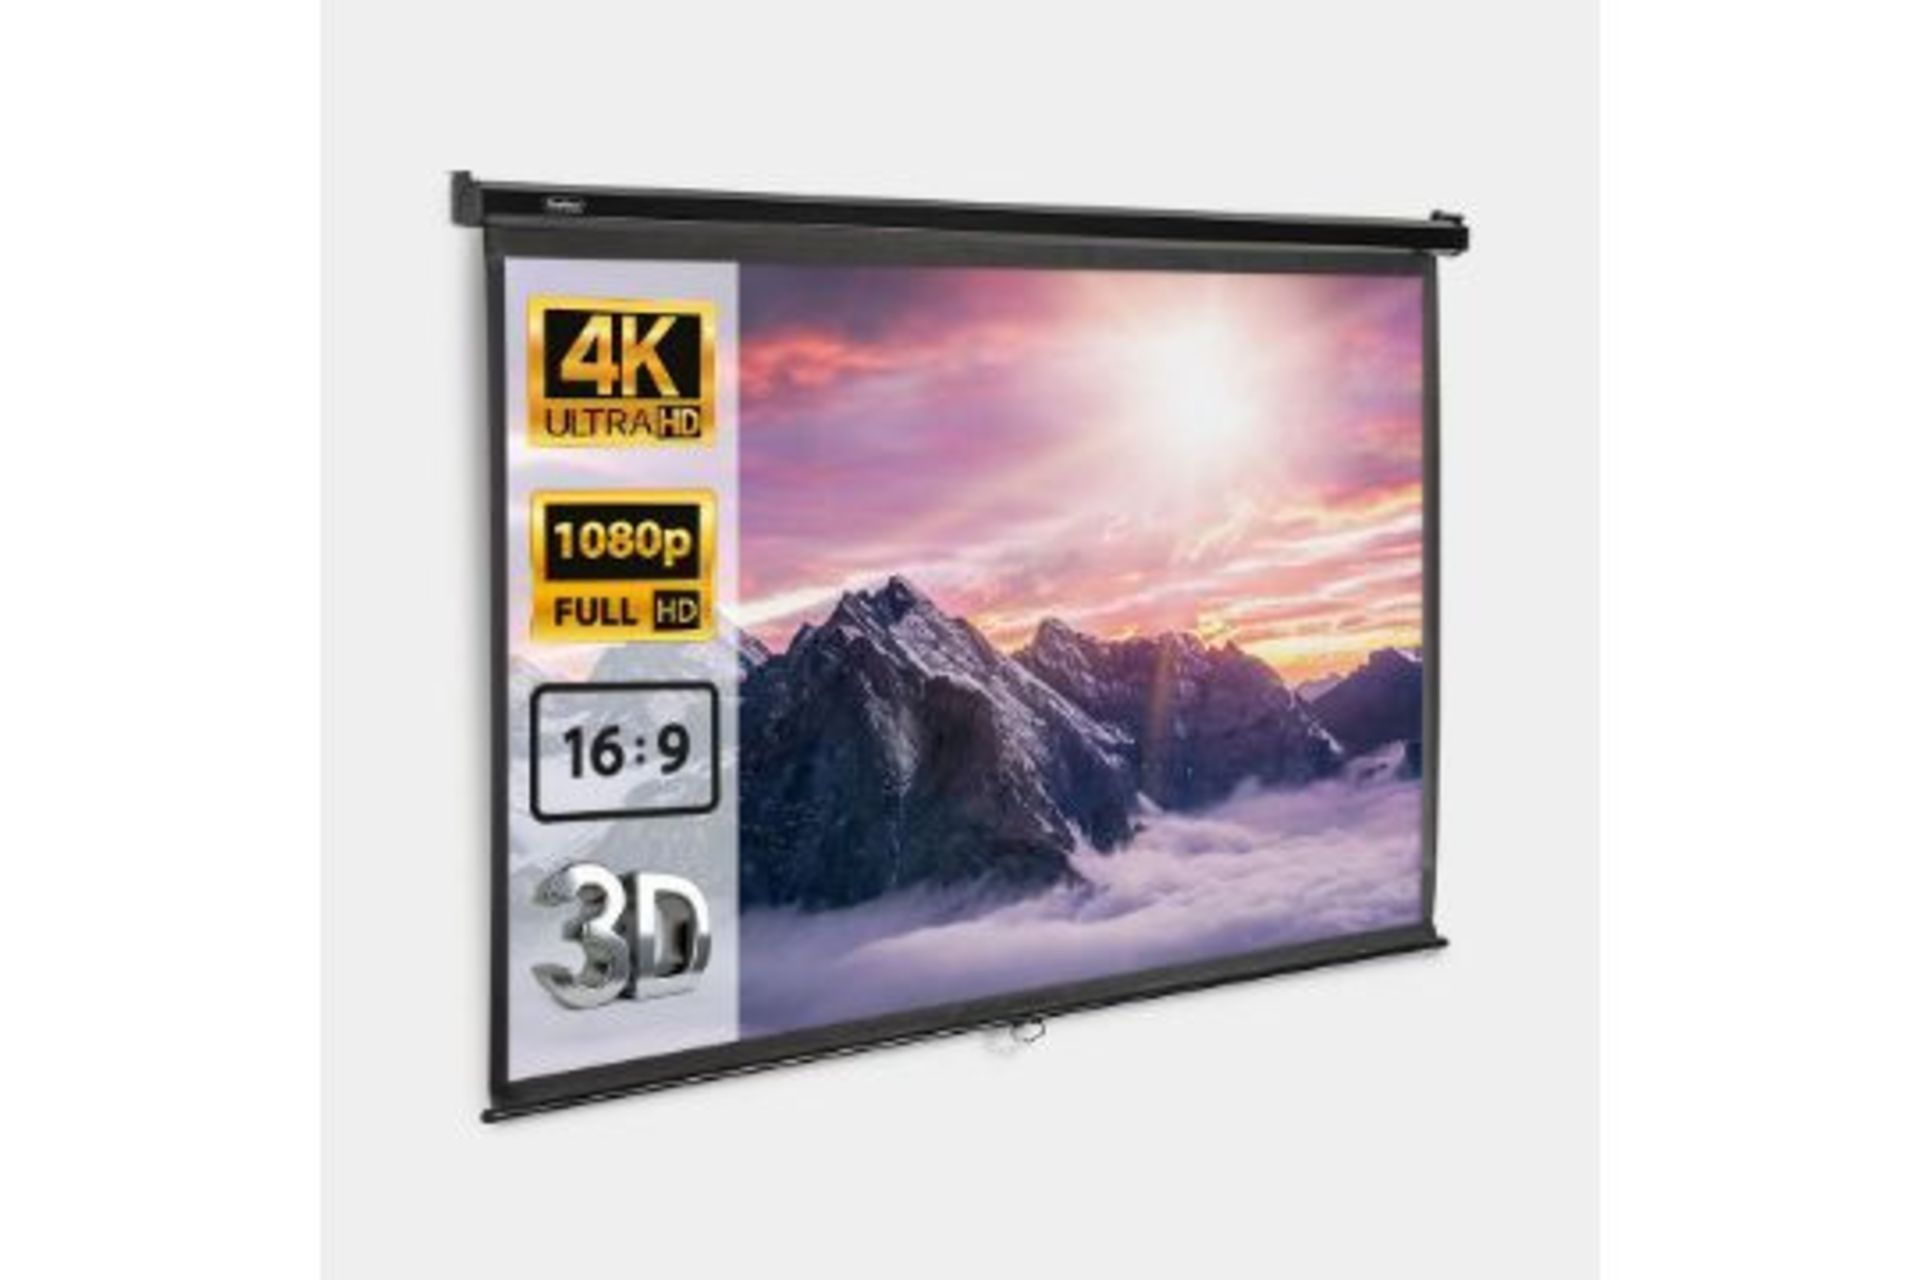 80-Inch Pull-Down Projector Screen. - SR7. Simple to install, easy to operate and delivering a